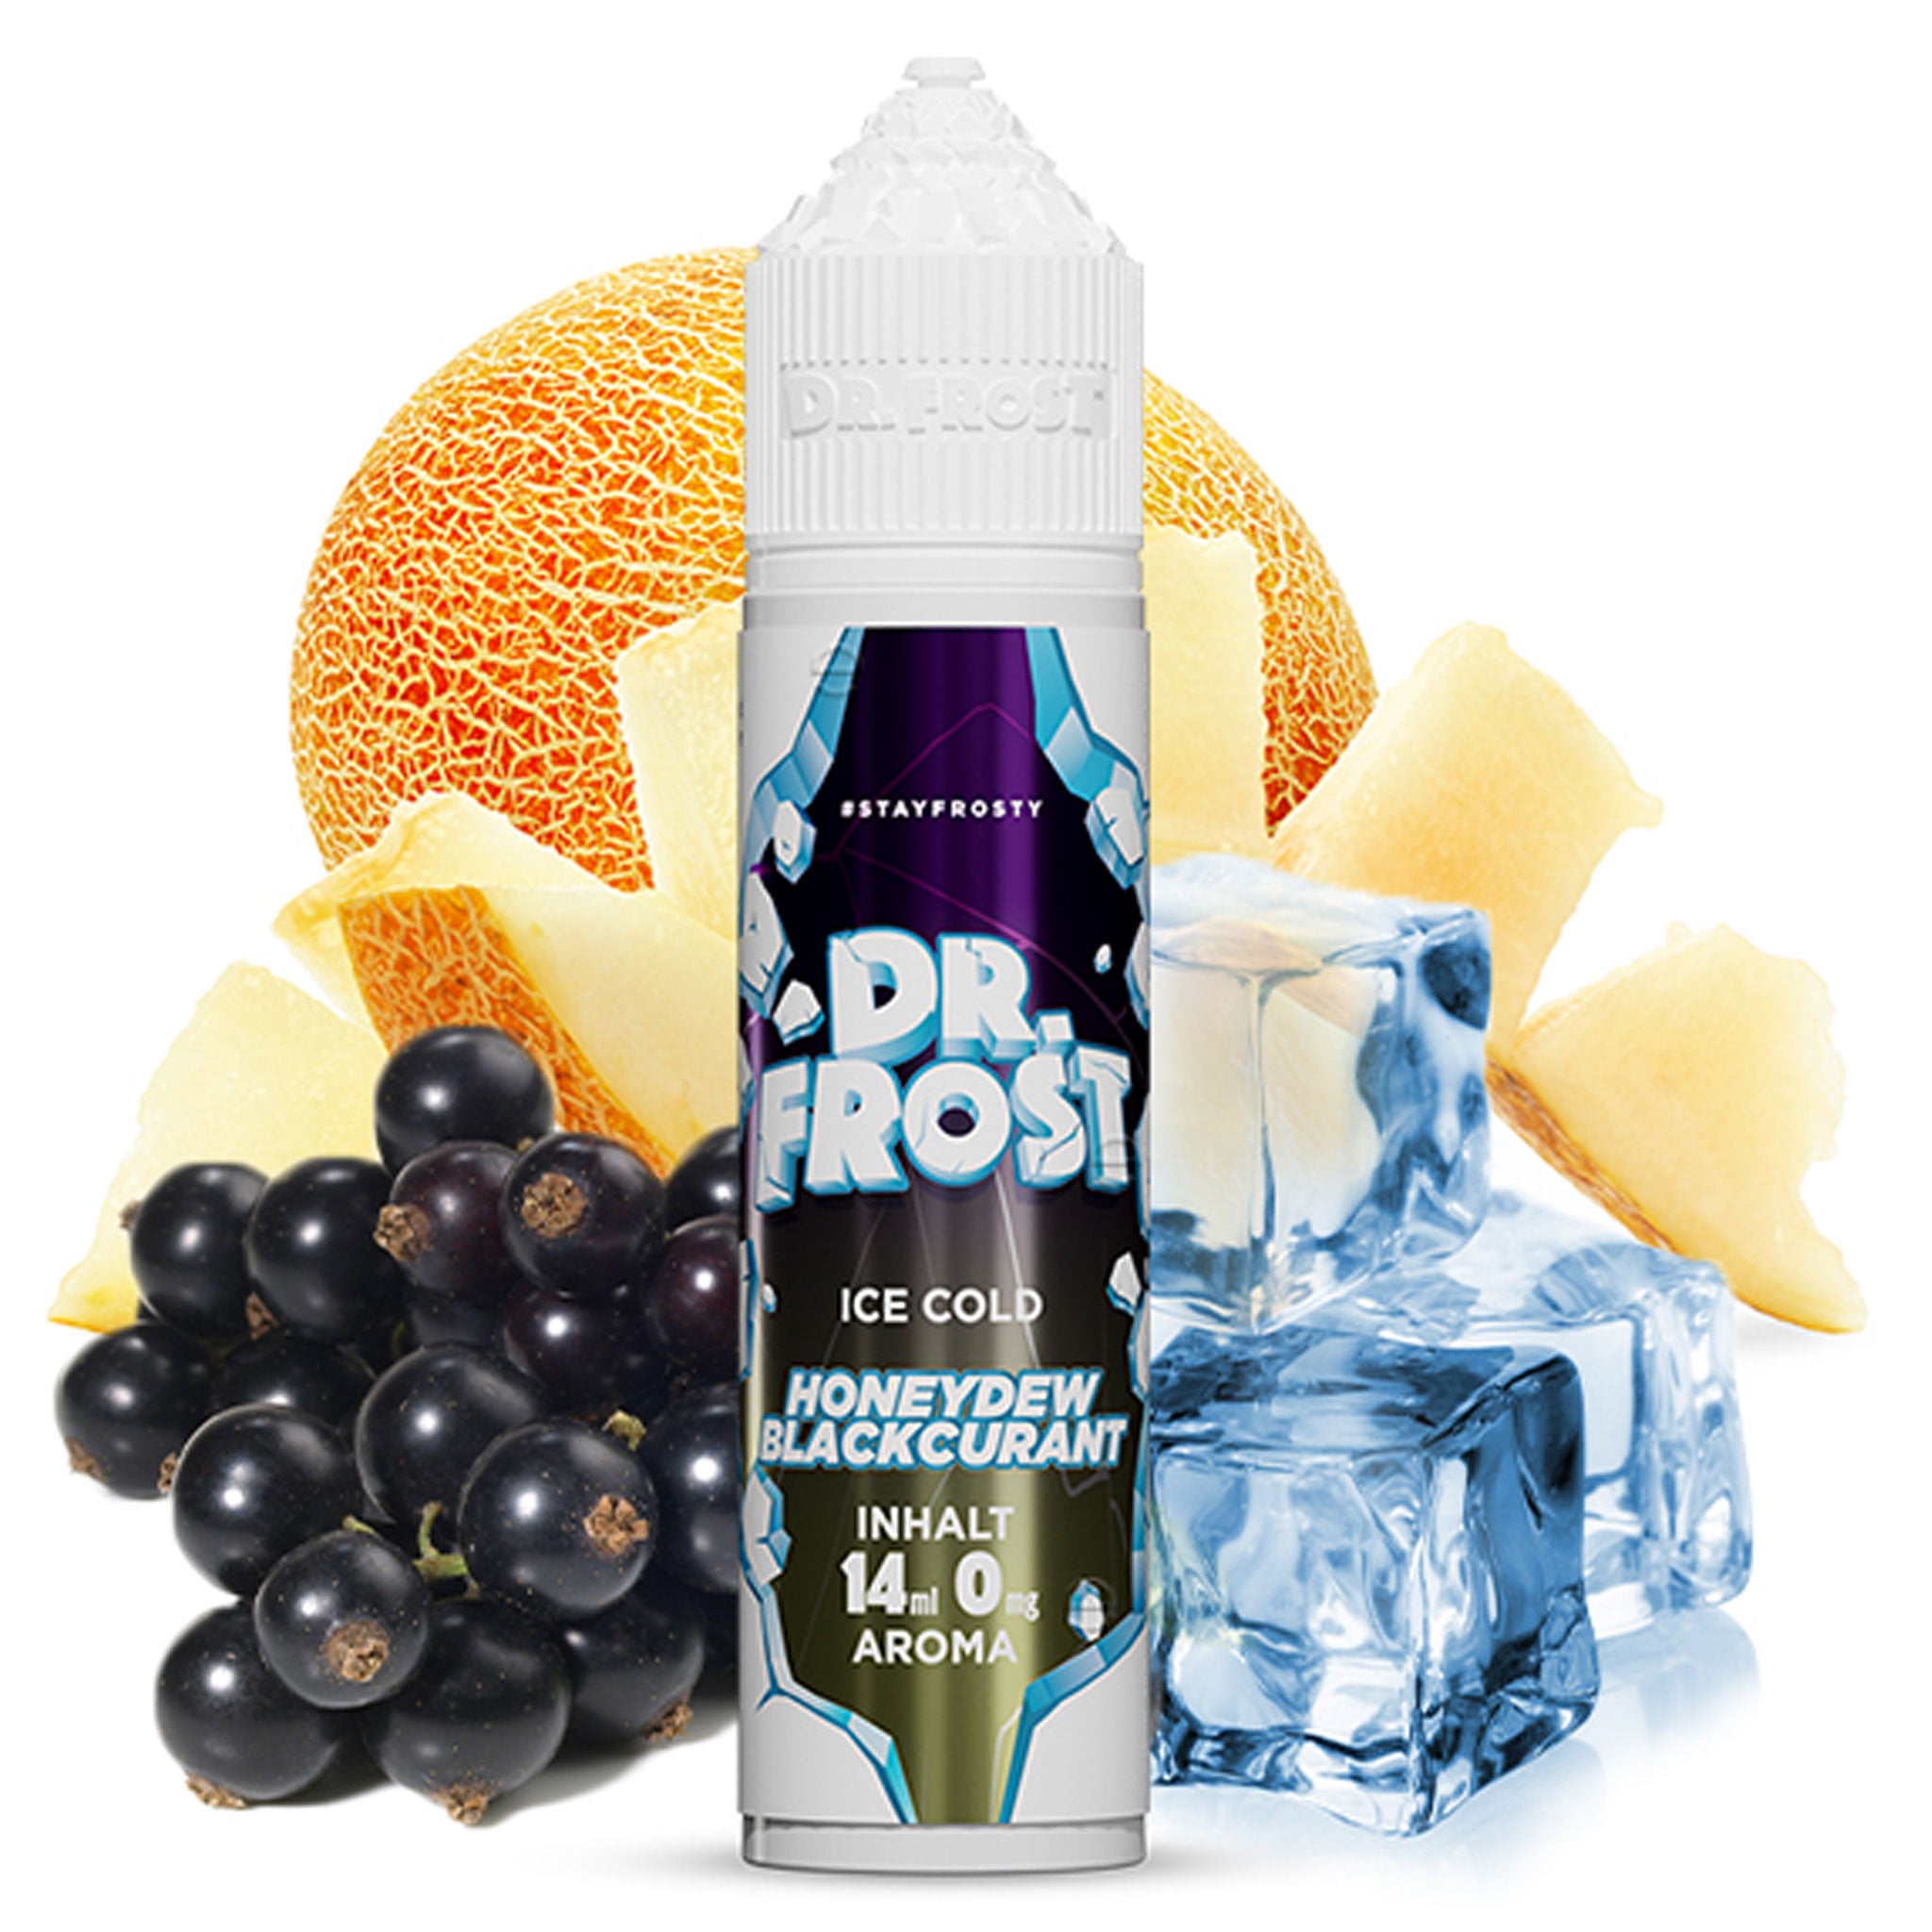 Dr. Frost - Ice Cold - Honeydew Blackcurrant - Longfill Aroma 14 ml